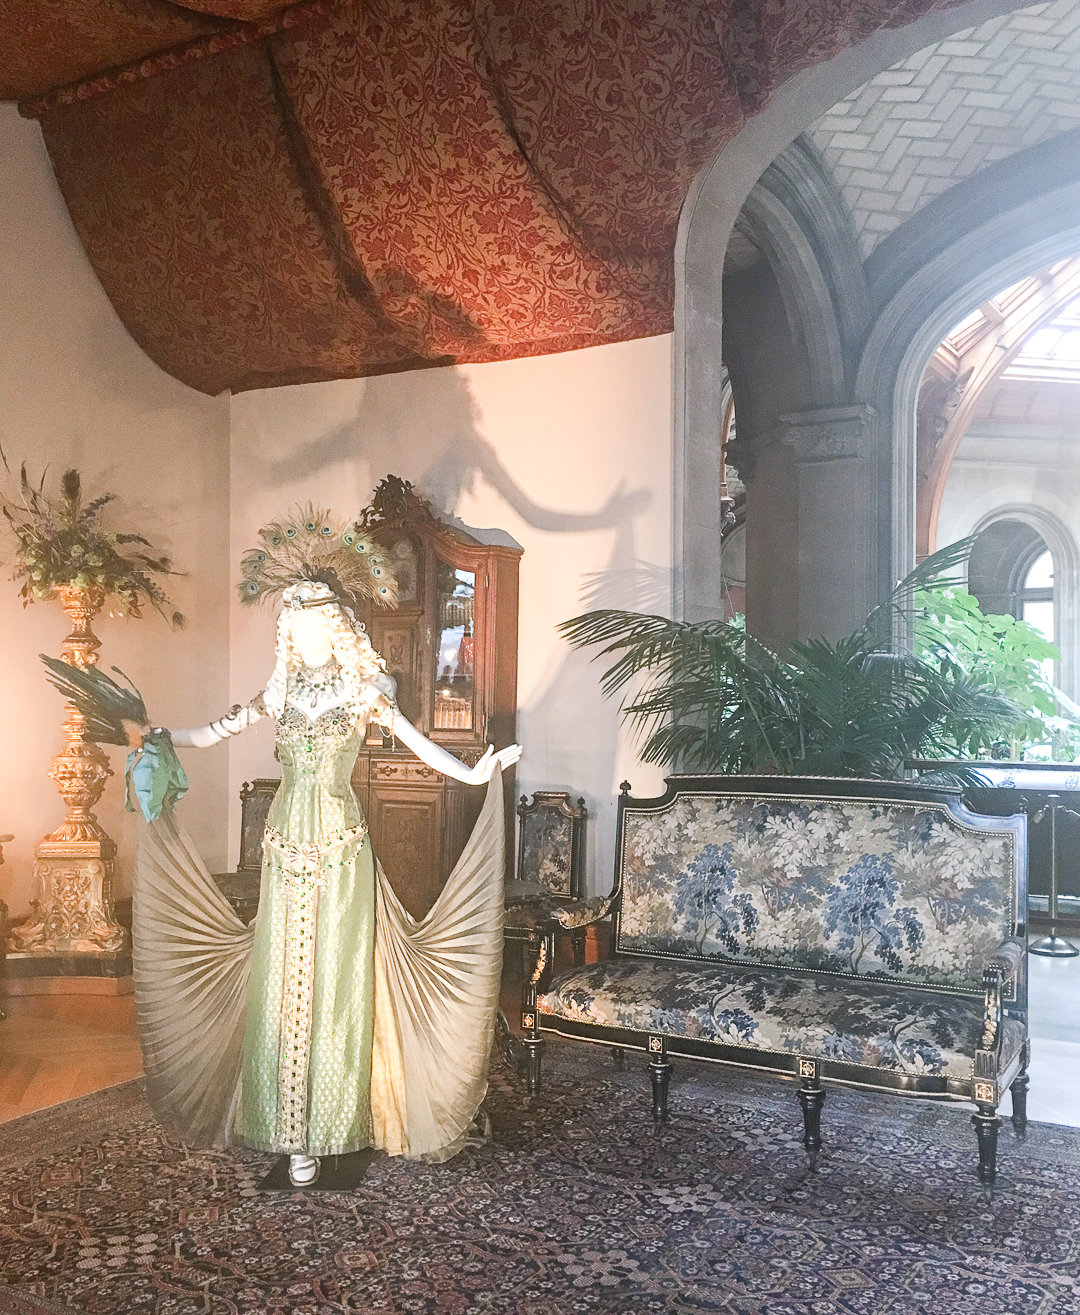 Fashion from the classic movies designed at the Biltmore Residence. 